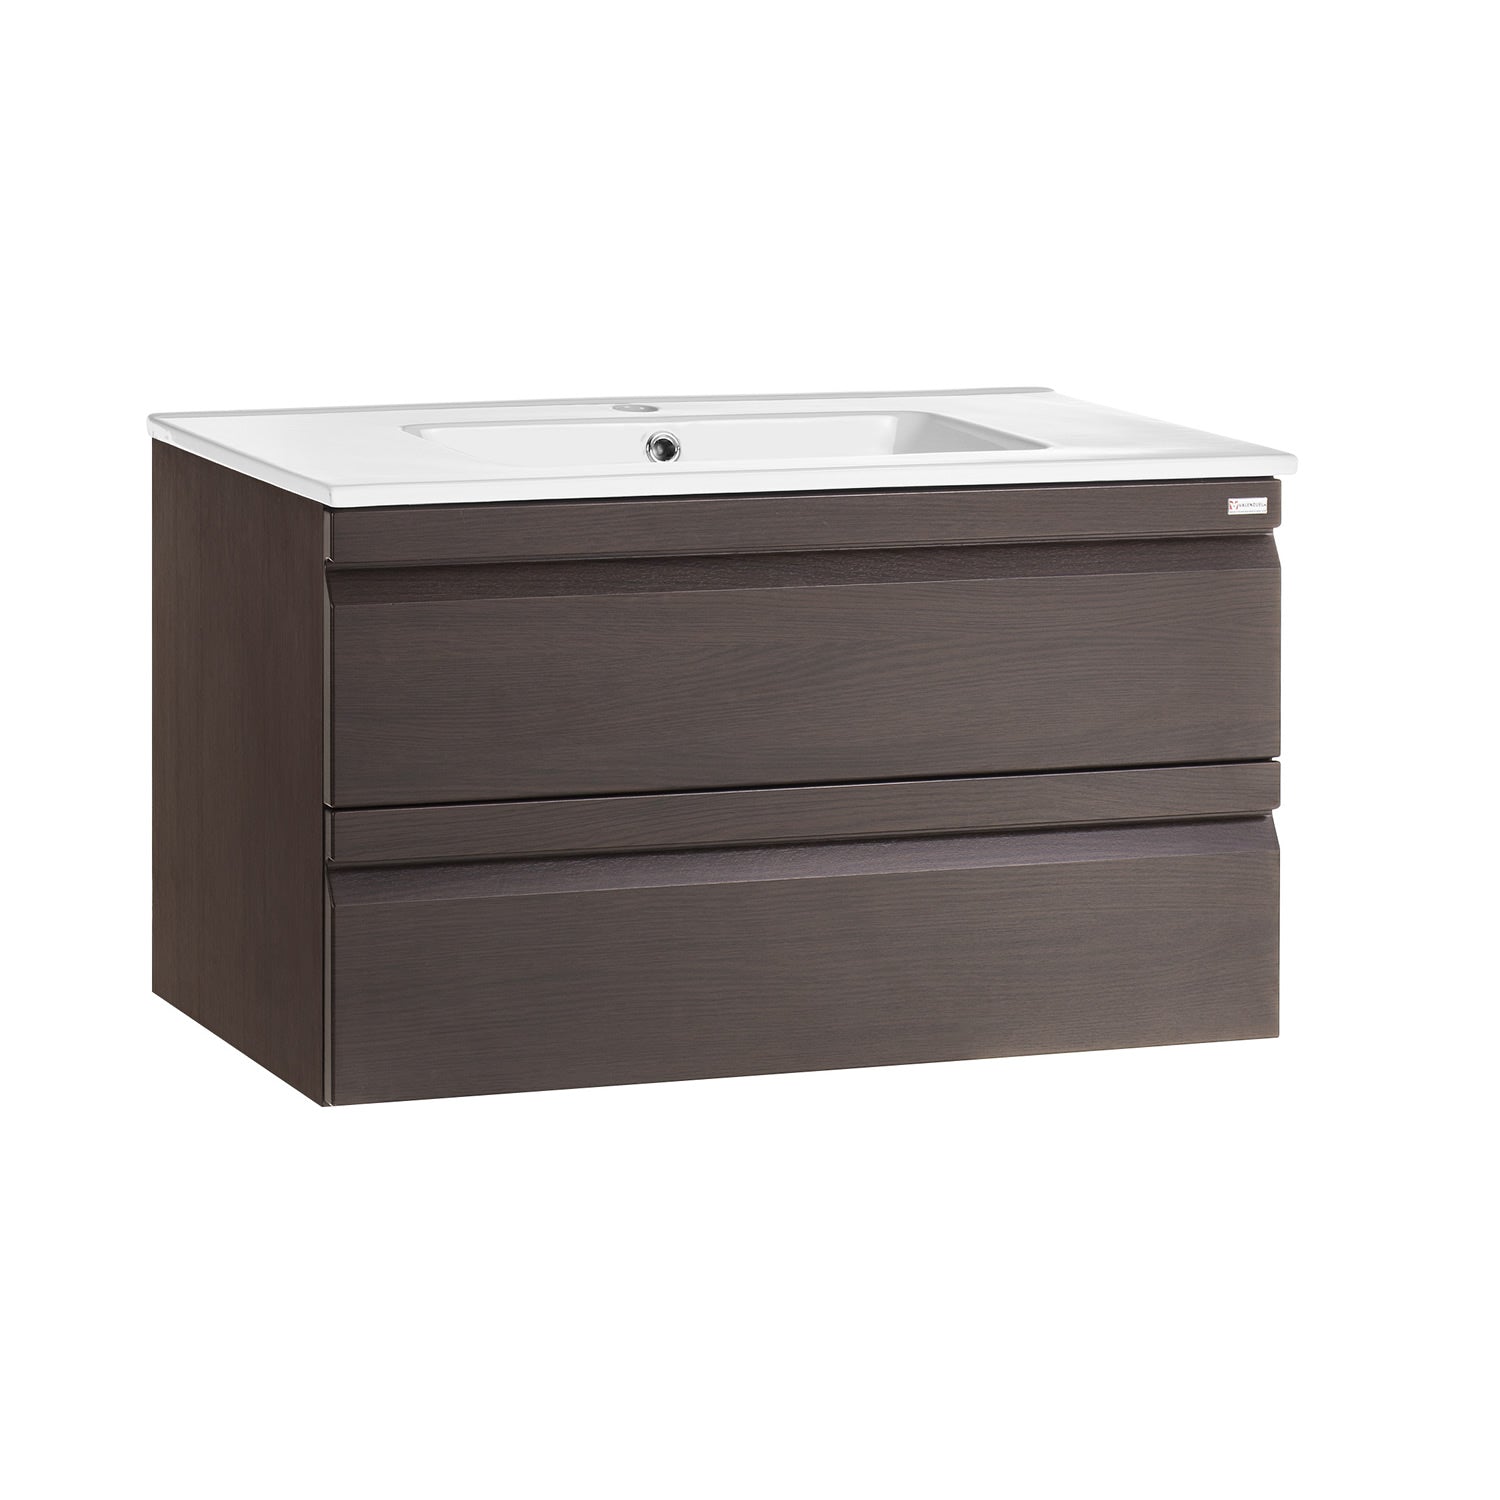 40" Single Vanity, Wall Mount, 2 Drawers with Soft Close, Wenge, Serie Solco by VALENZUELA